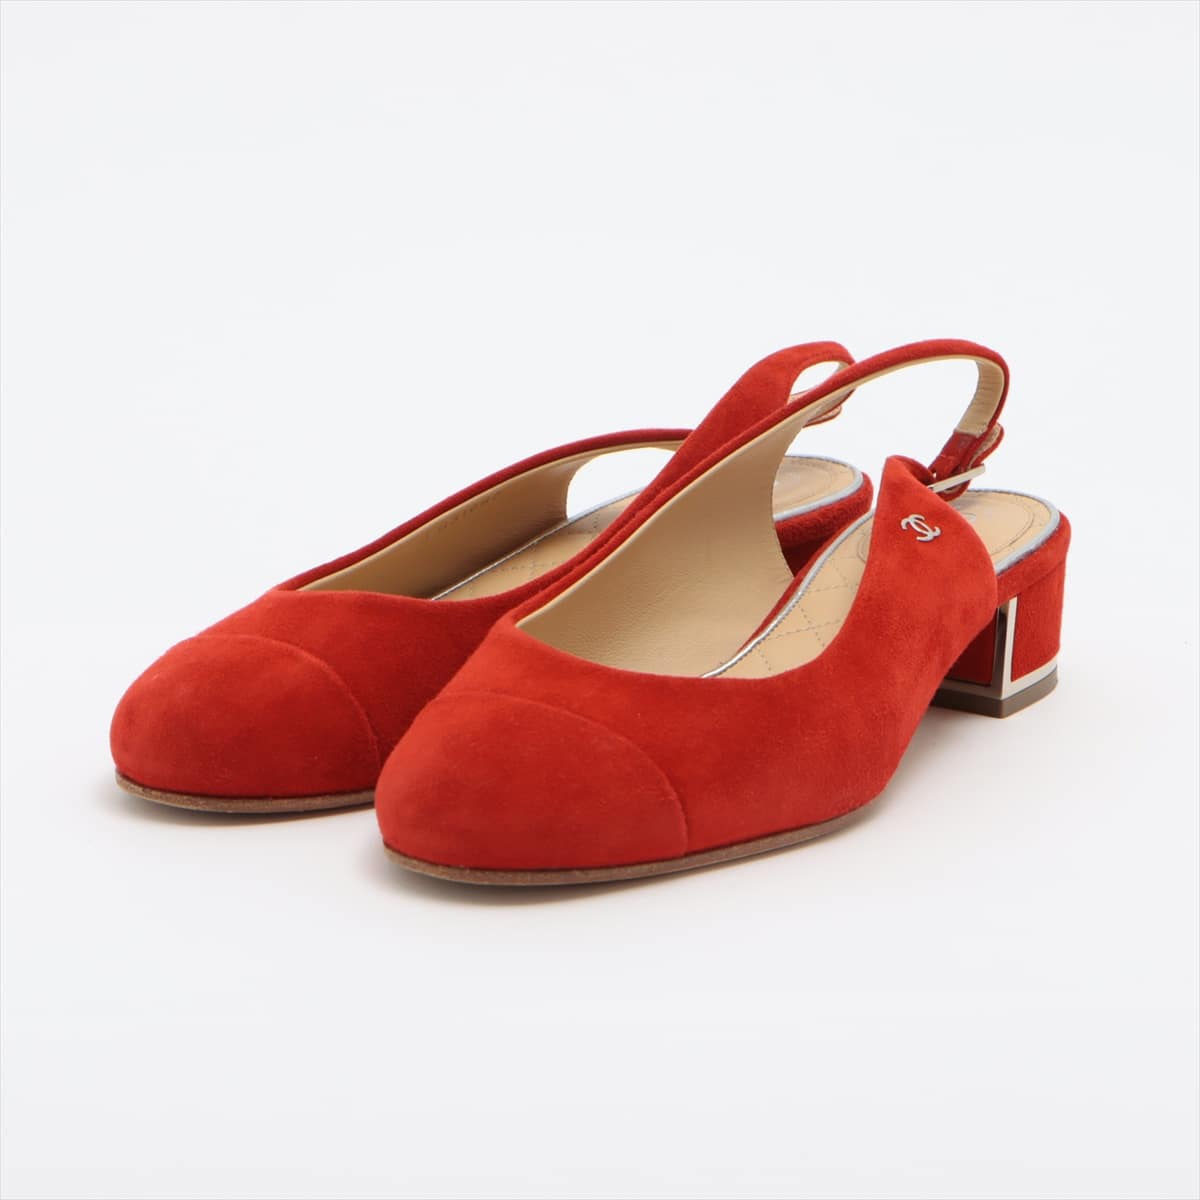 Chanel Coco Mark Suede Pumps 36 1/2C Ladies' Red G31662